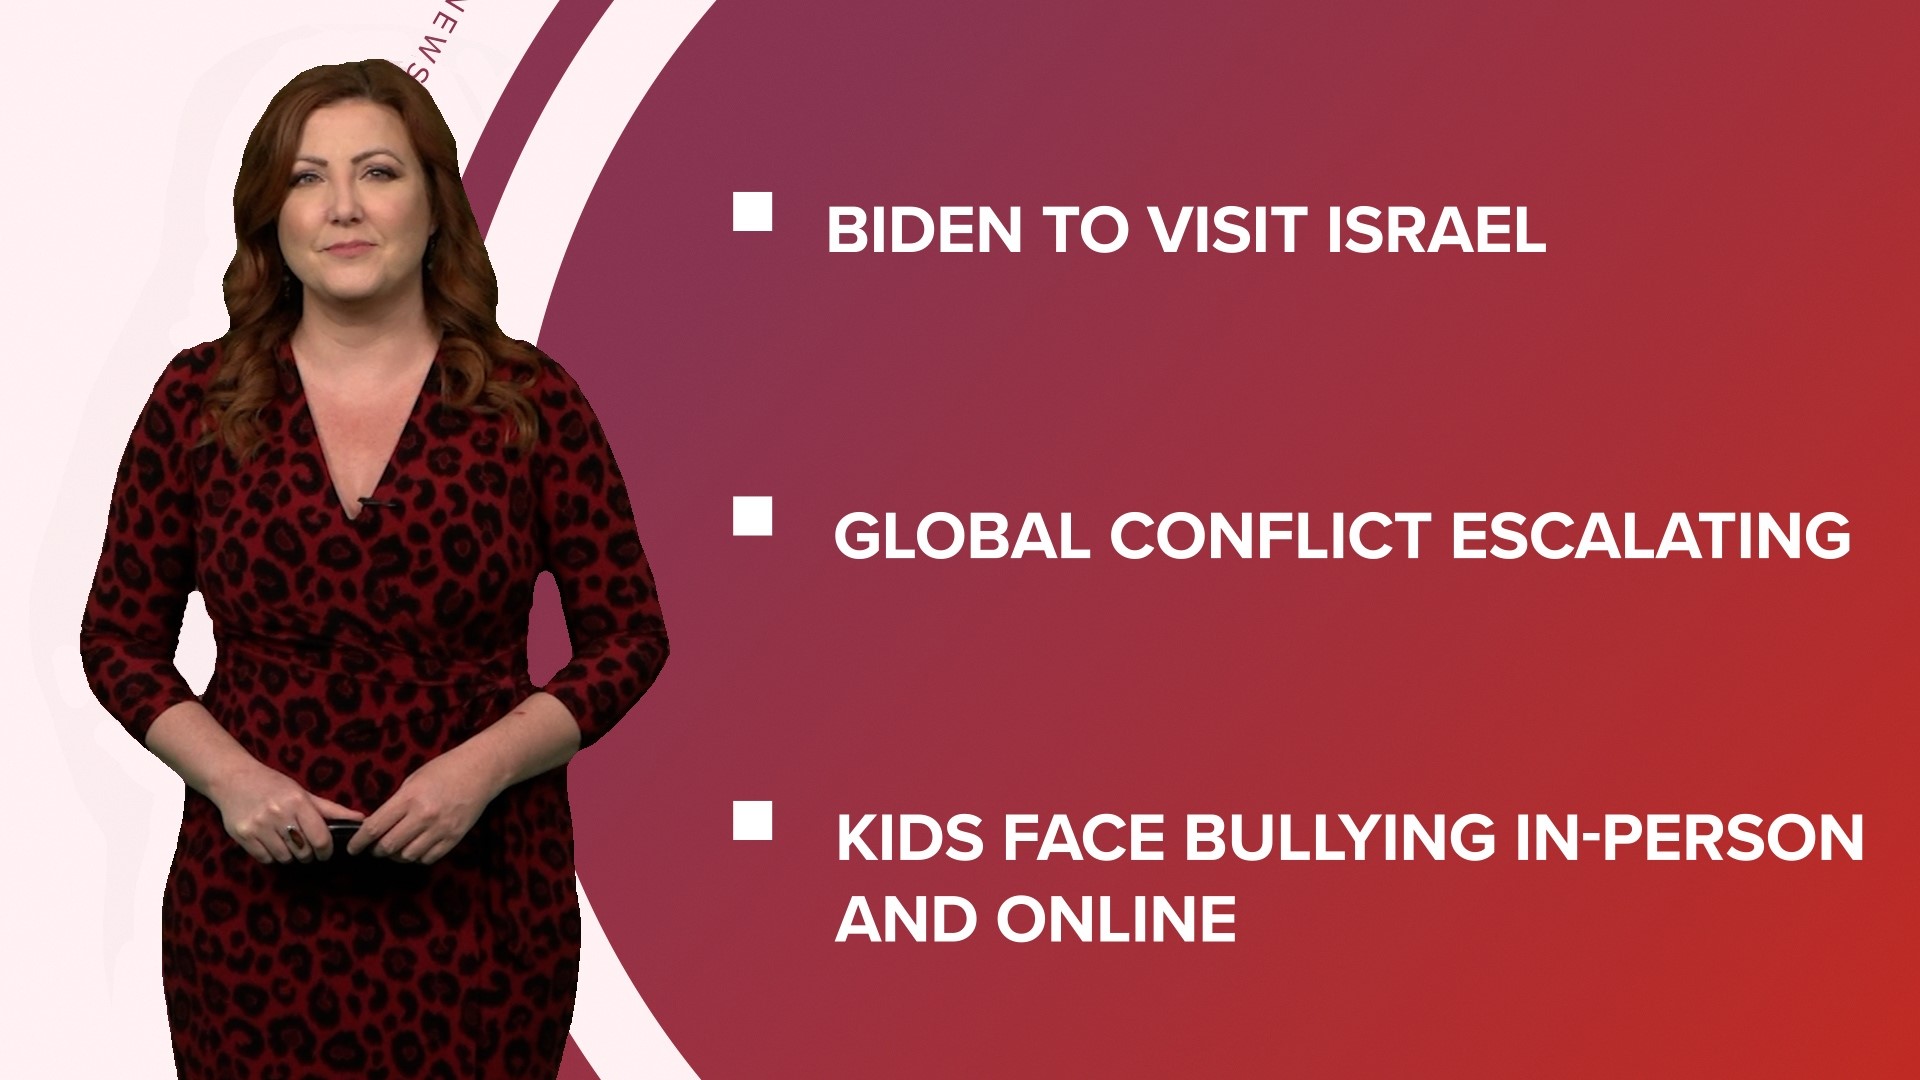 A look at what is happening in the news from President Biden to visit Israel to concerns over cyberbullying and new sports added to the 2024 Olympics.